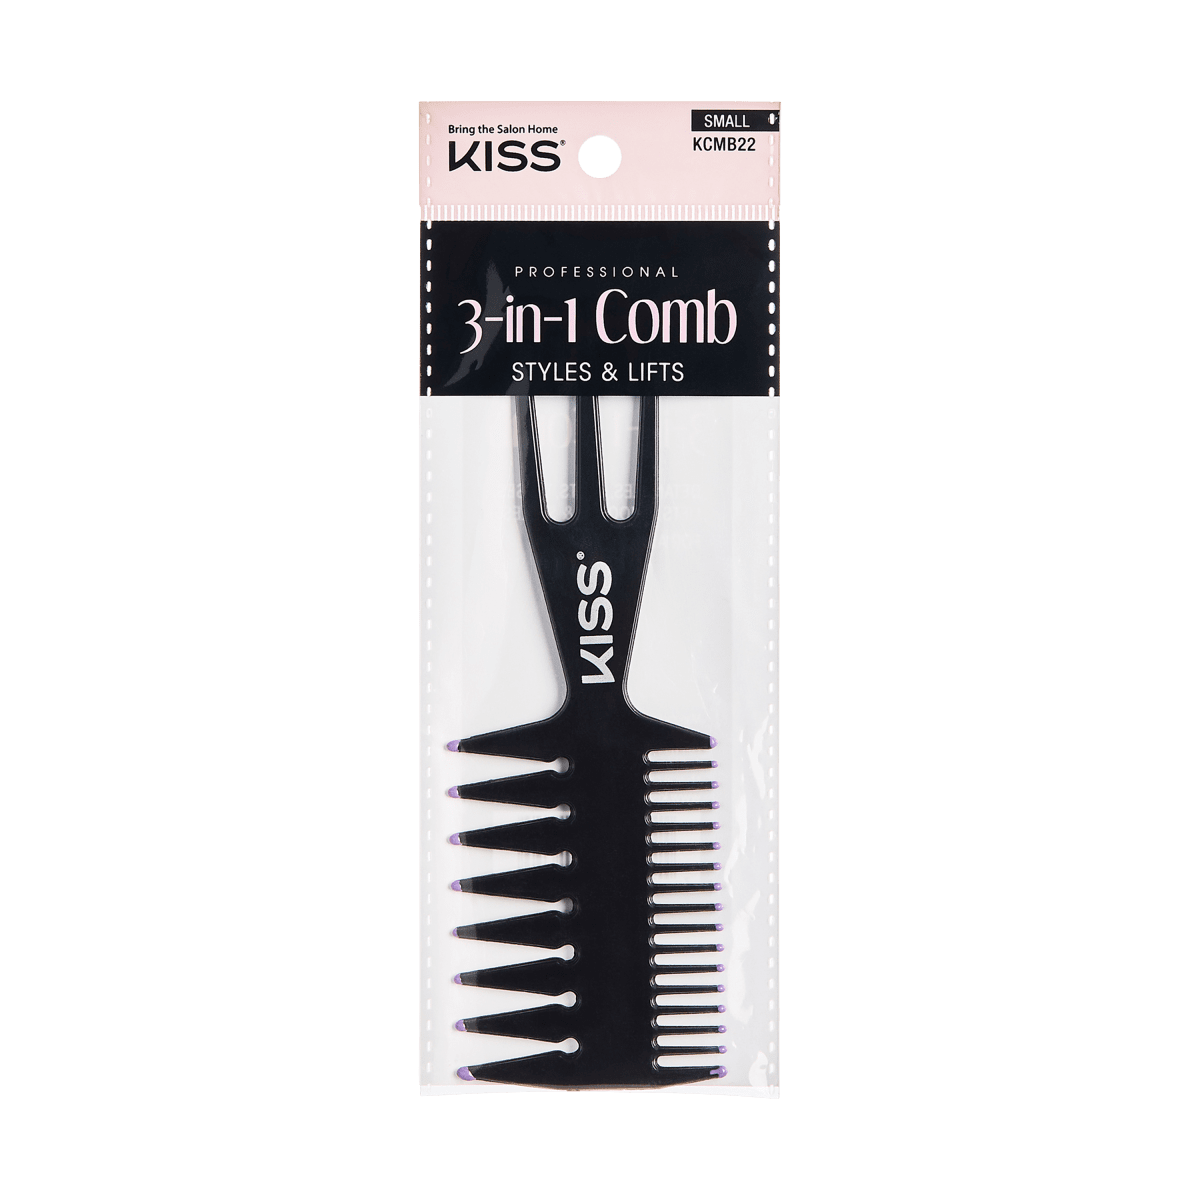 Professional 3-in-1 Comb - Small